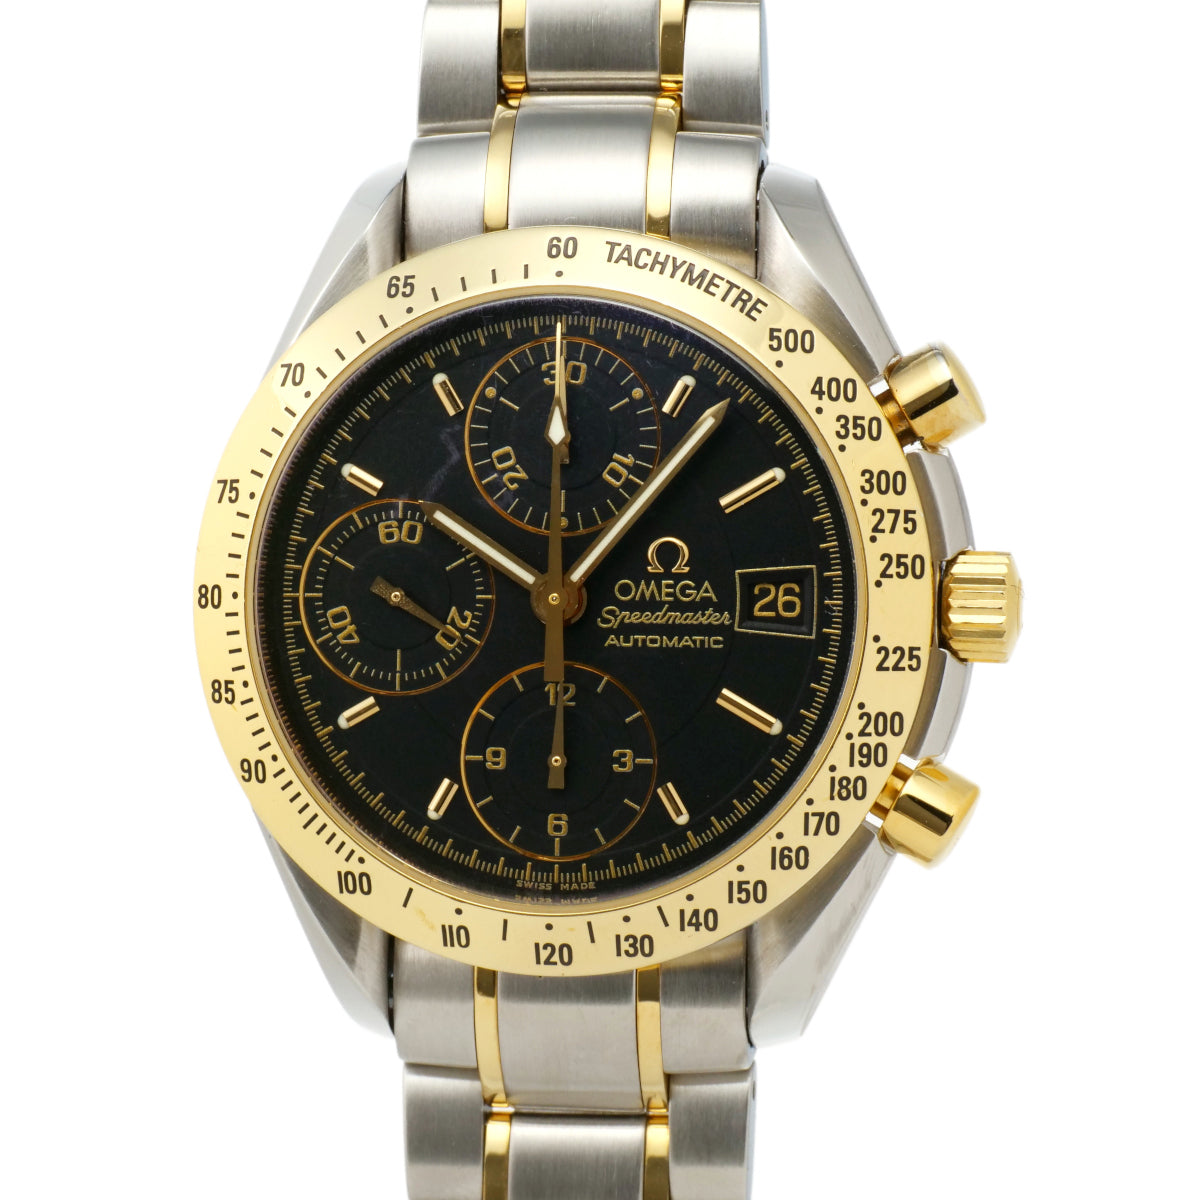 Other  Omega OMEGA Men’s Speedmaster 3313.50 Chronograph Automatic Watch, Stainless Steel, Gold 3313.5 in Good condition